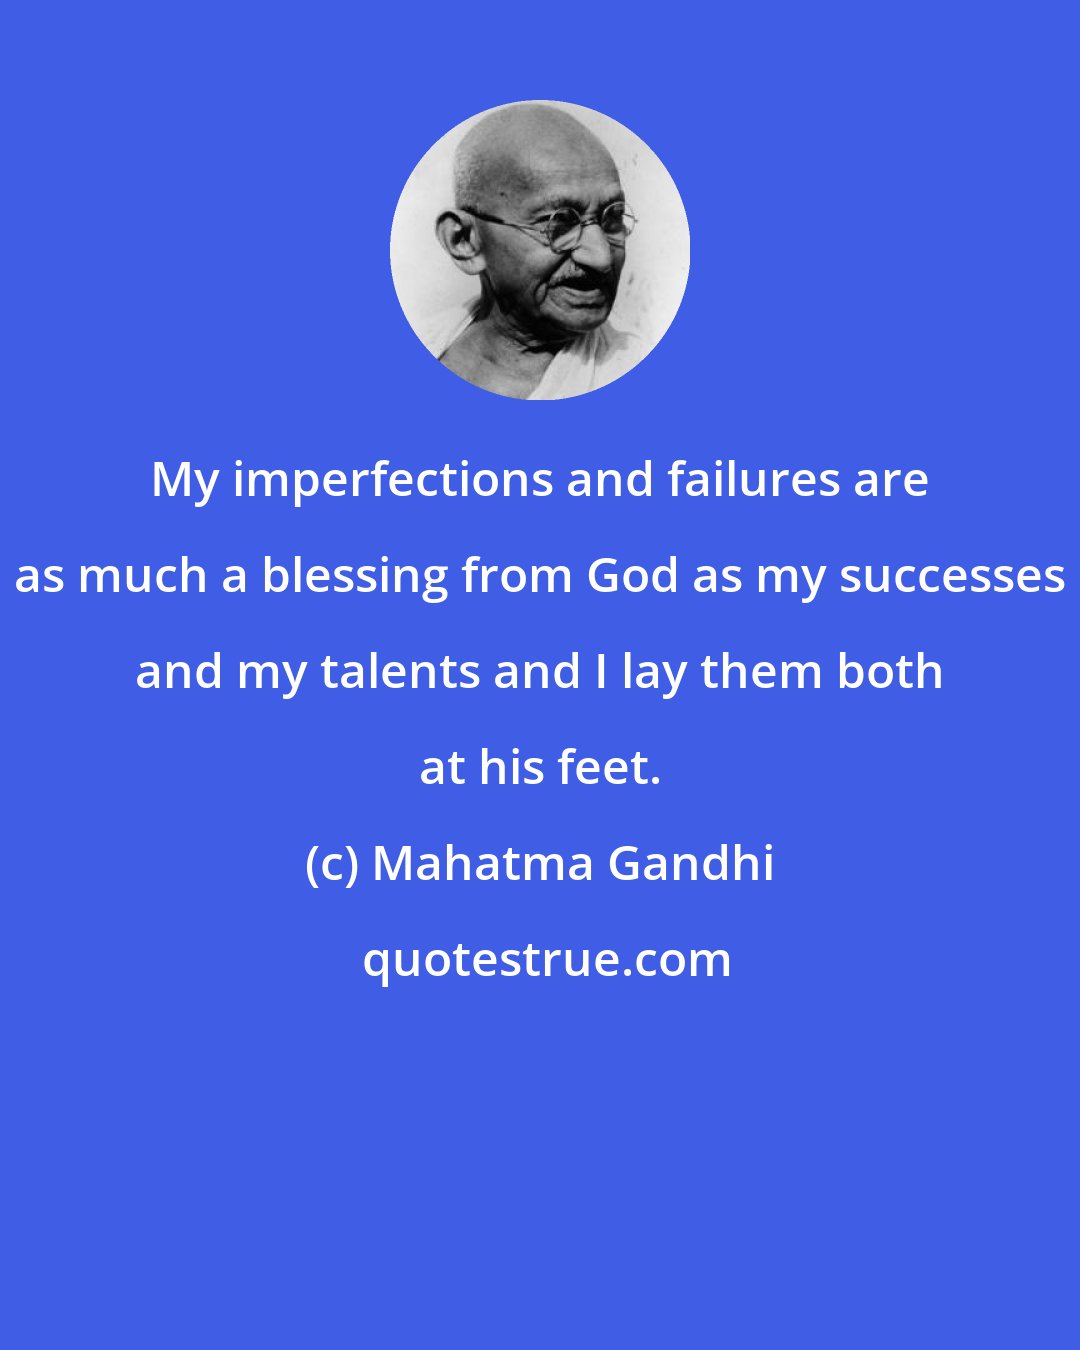 Mahatma Gandhi: My imperfections and failures are as much a blessing from God as my successes and my talents and I lay them both at his feet.